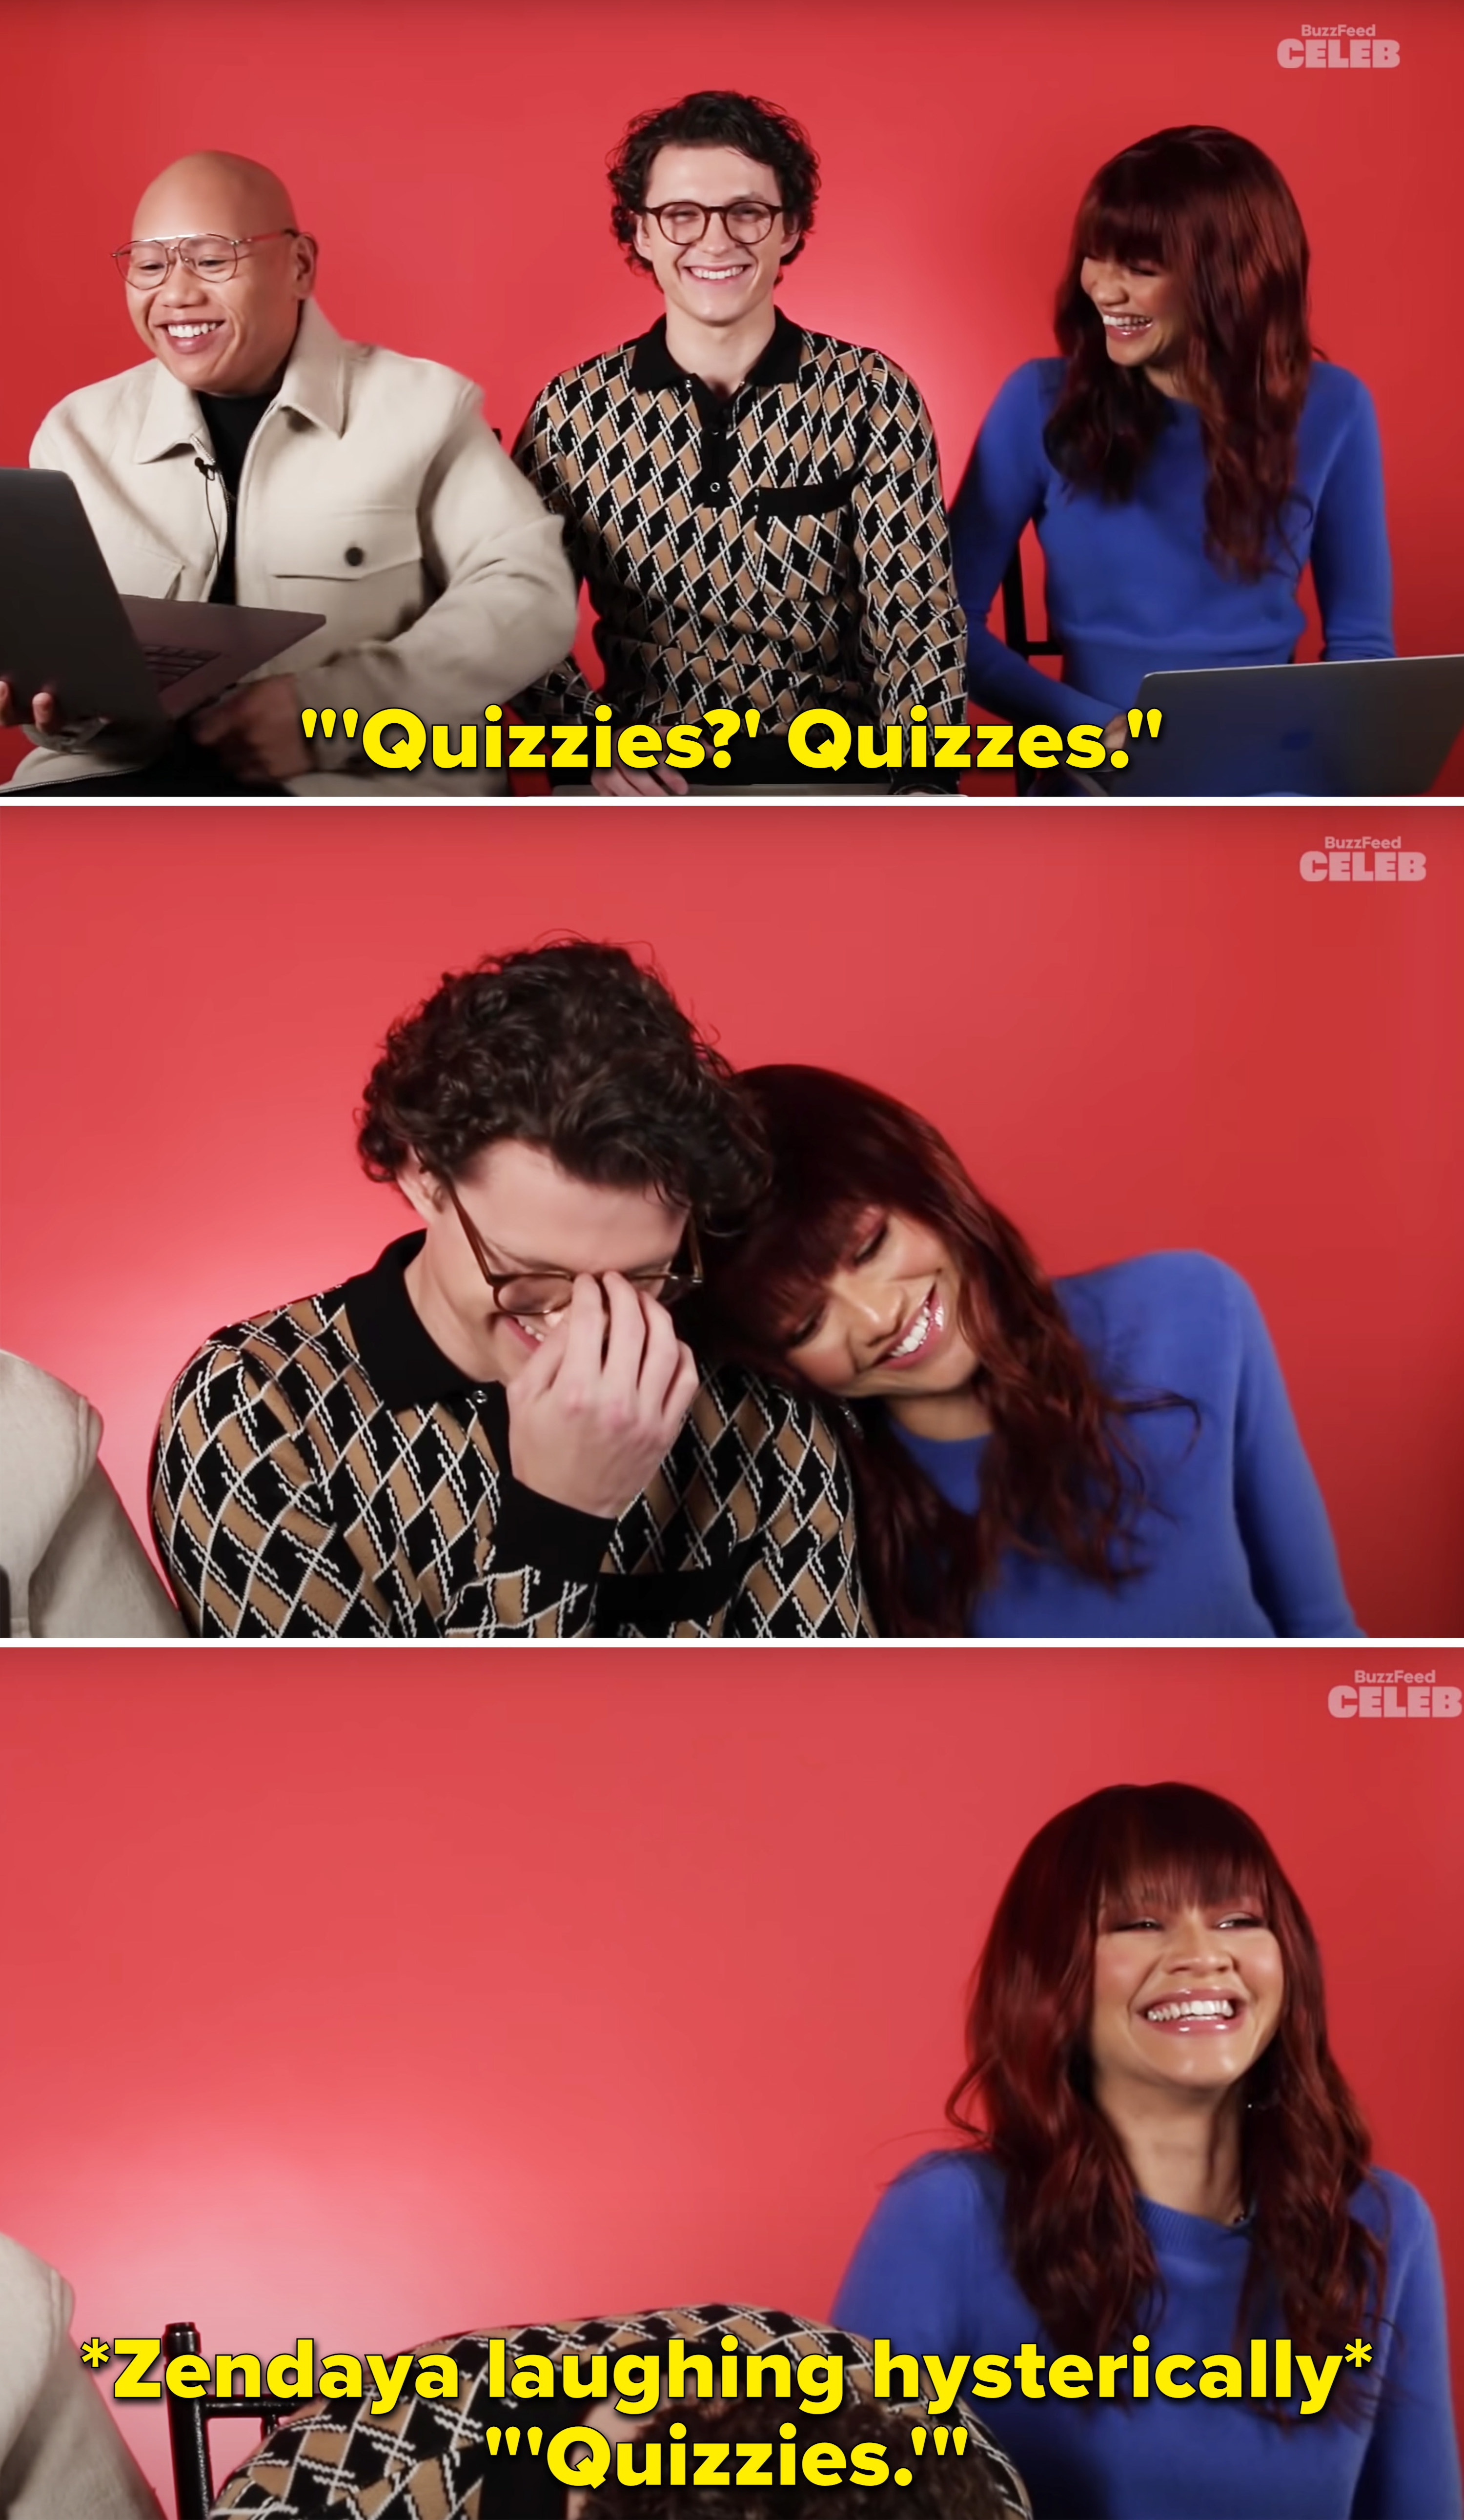 Zendaya laughing and repeating &quot;Quizzies&quot;